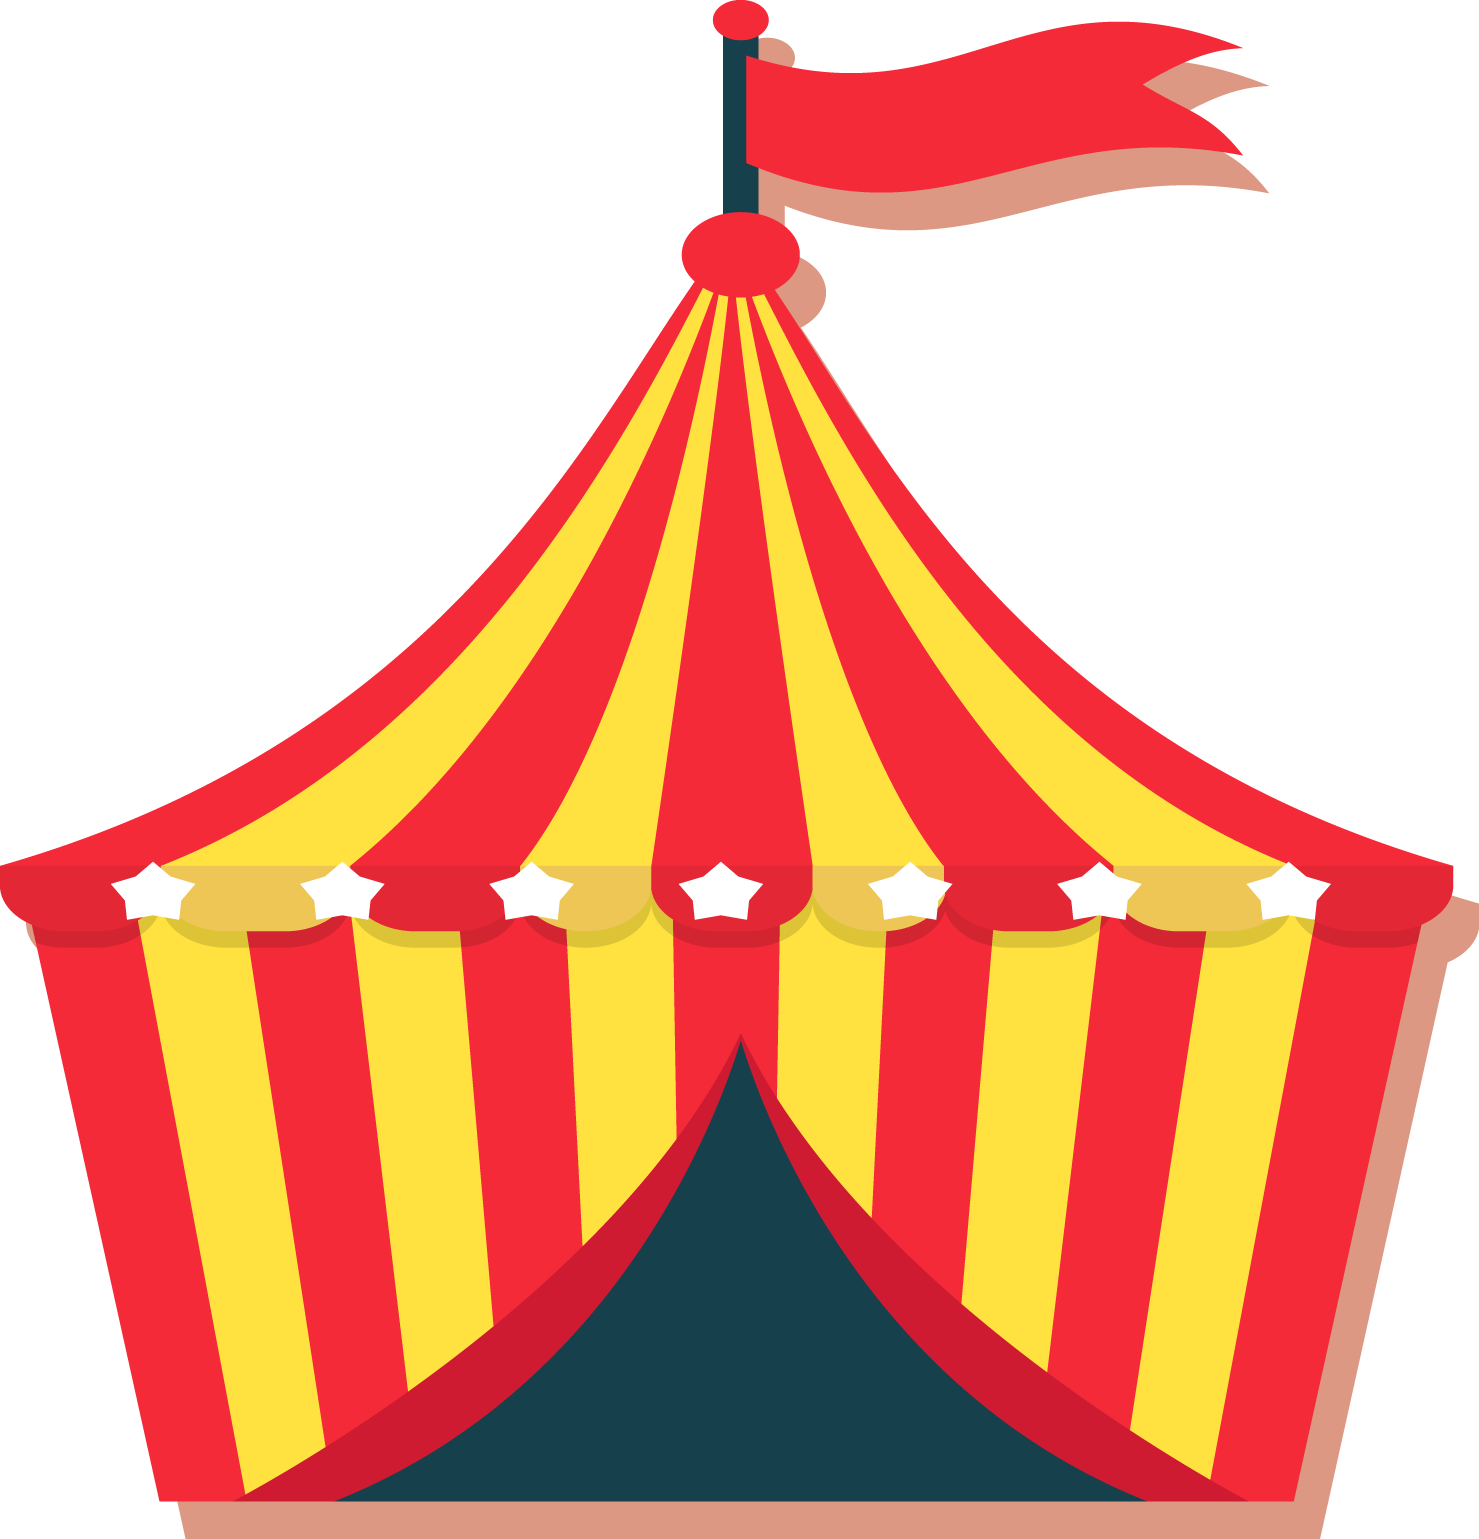 A Red And Yellow Striped Tent With A Flag On Top